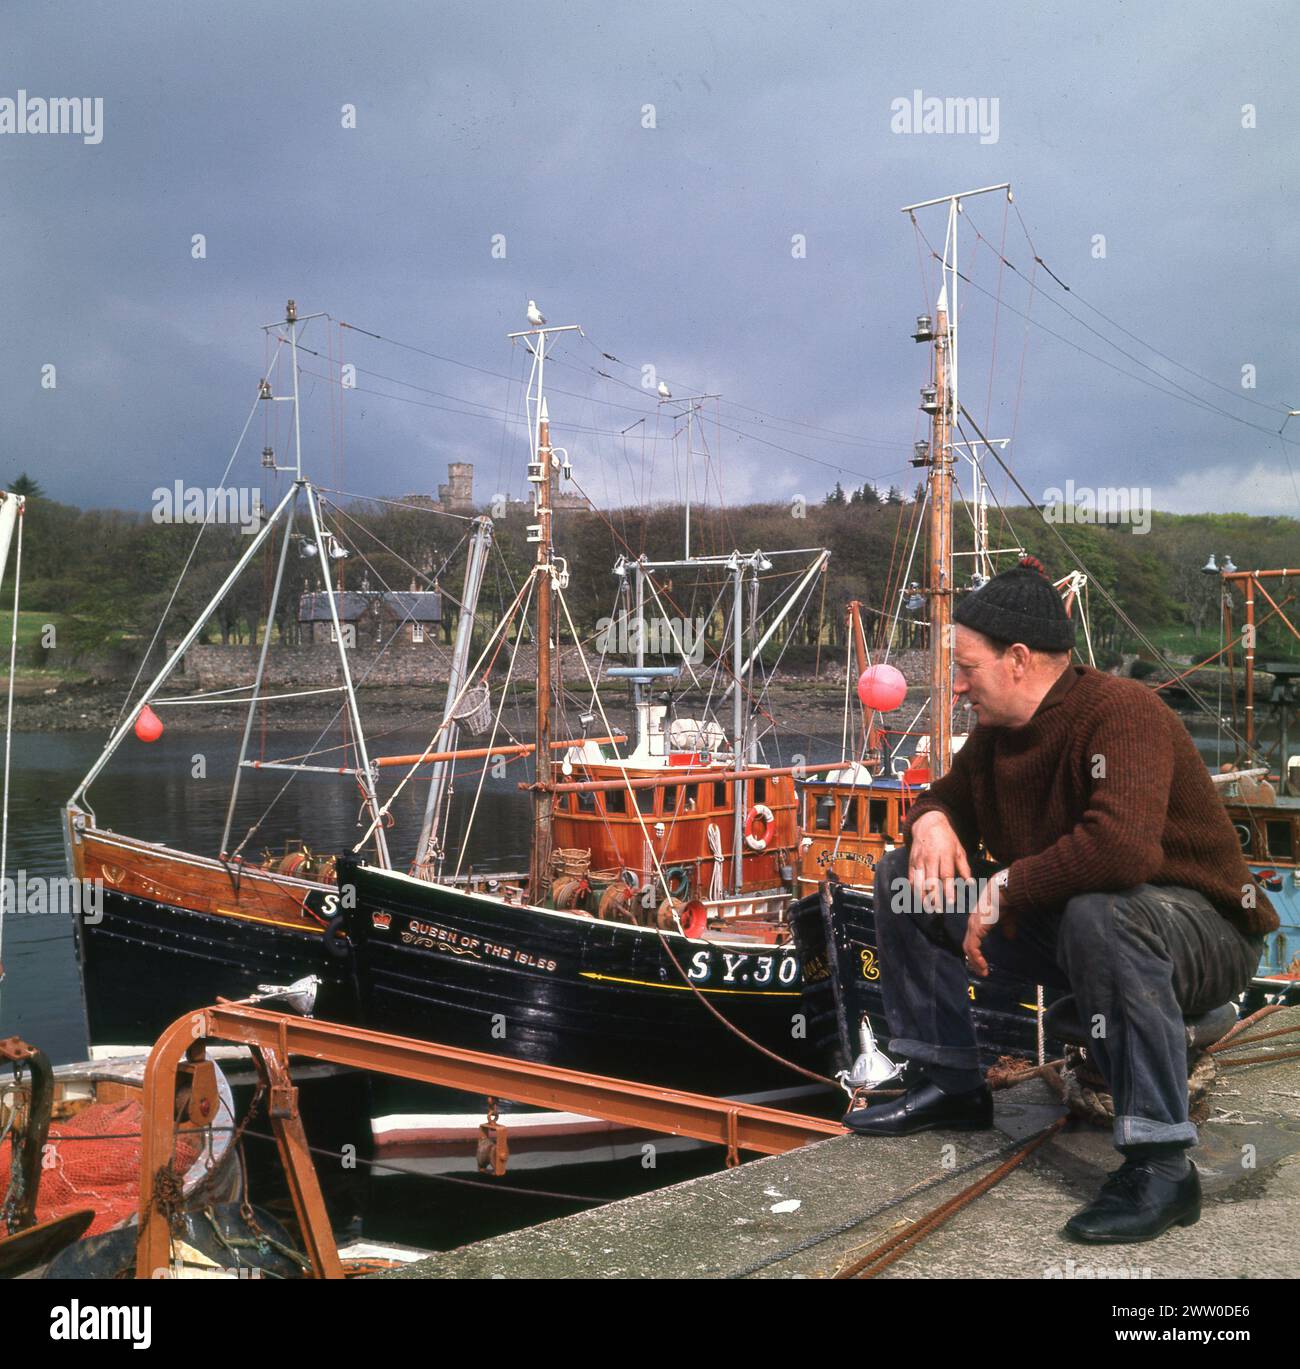 1960s, historical, a fisherman sitting on quay fishing boats, Stornoway, isle of Lewis, Western Isles, Scotland, UK. Stornoway has been the centre of the British herring industry for centuries, with the height of the industry being between 1900 and WW1. While national eating habits saw herring fishing decline, the industry remains economically important for the island. Stock Photo